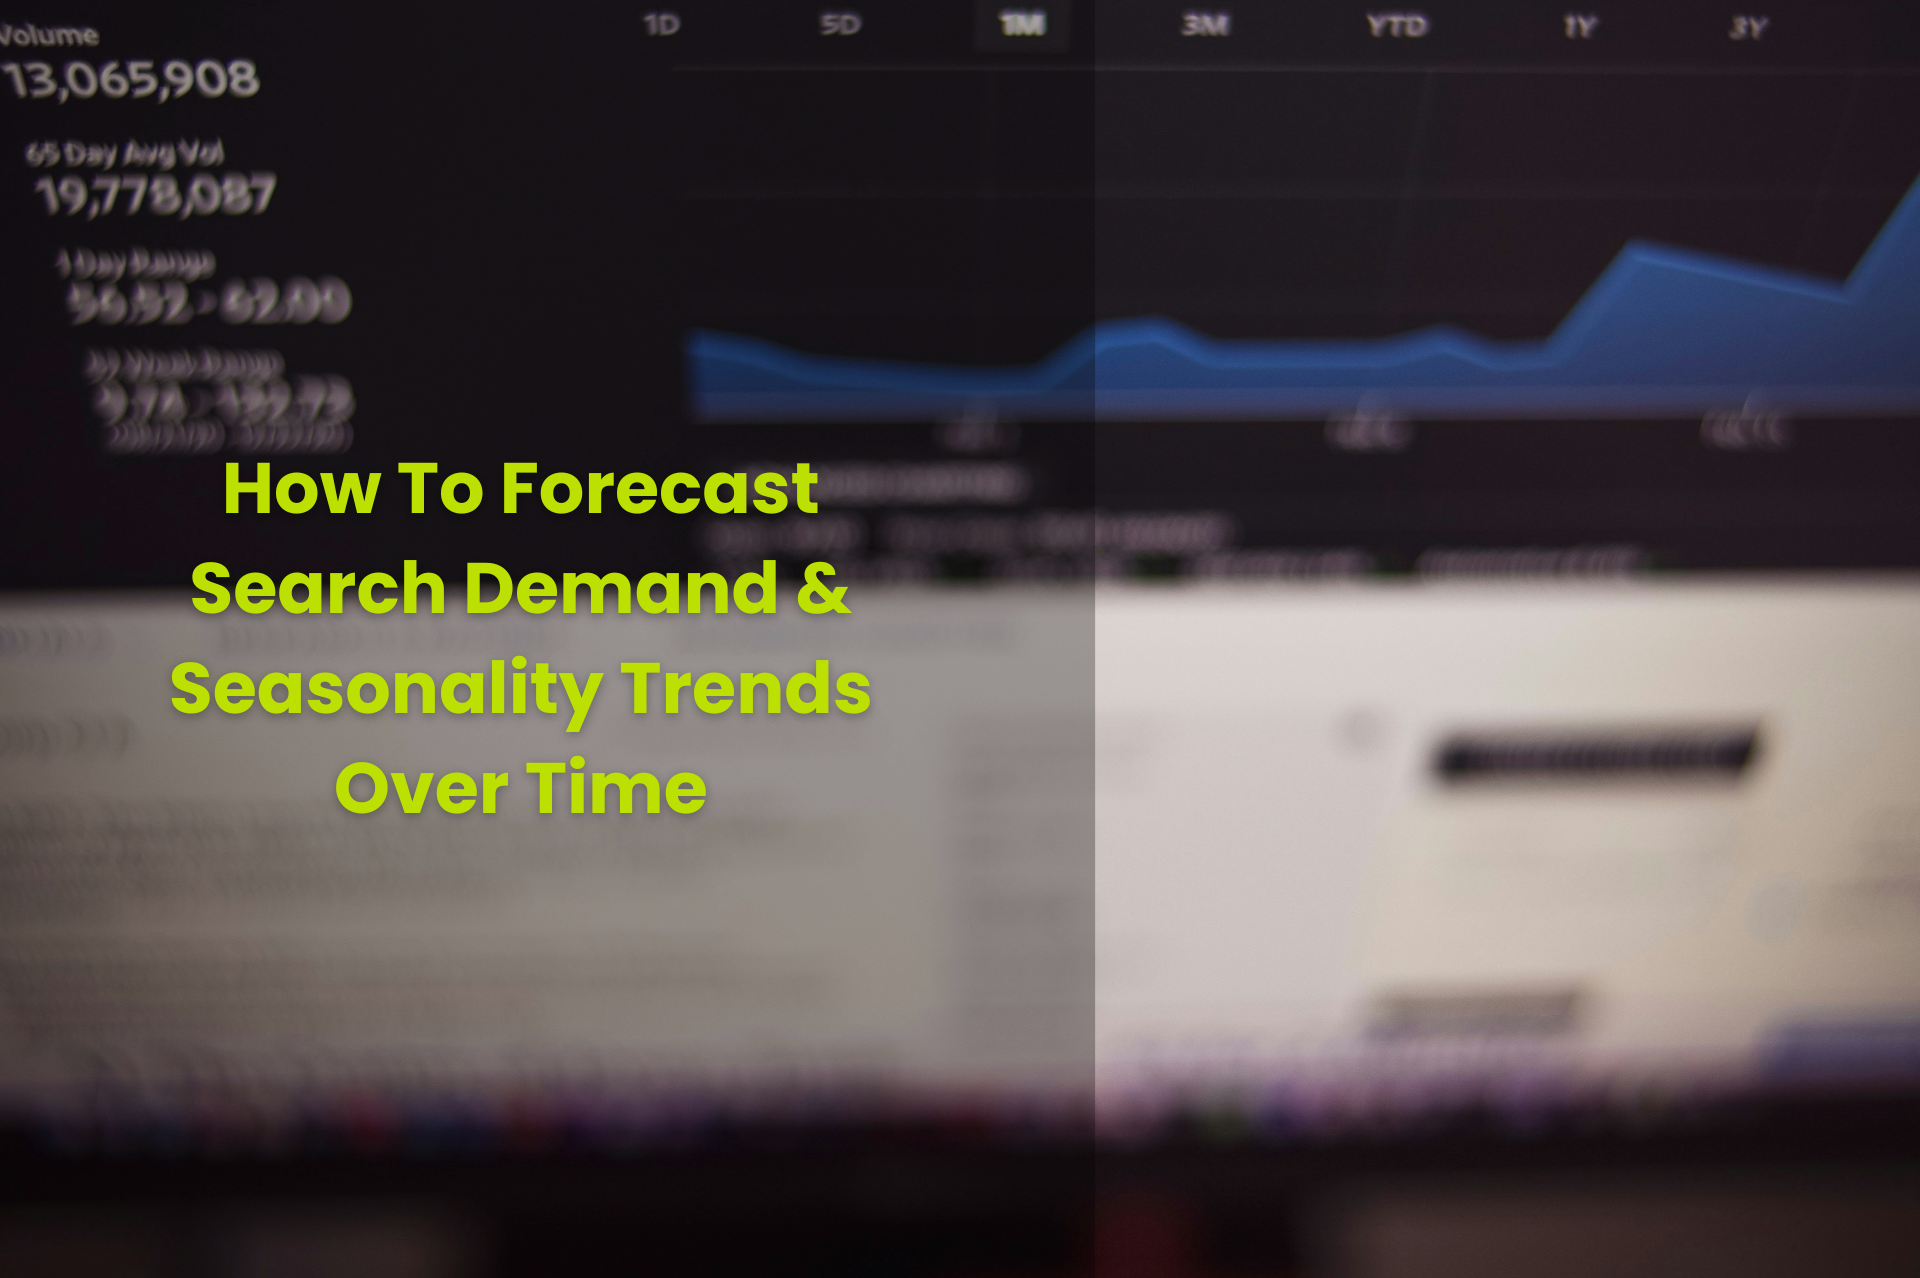 How To Forecast Search Demand & Seasonality Trends Over Time